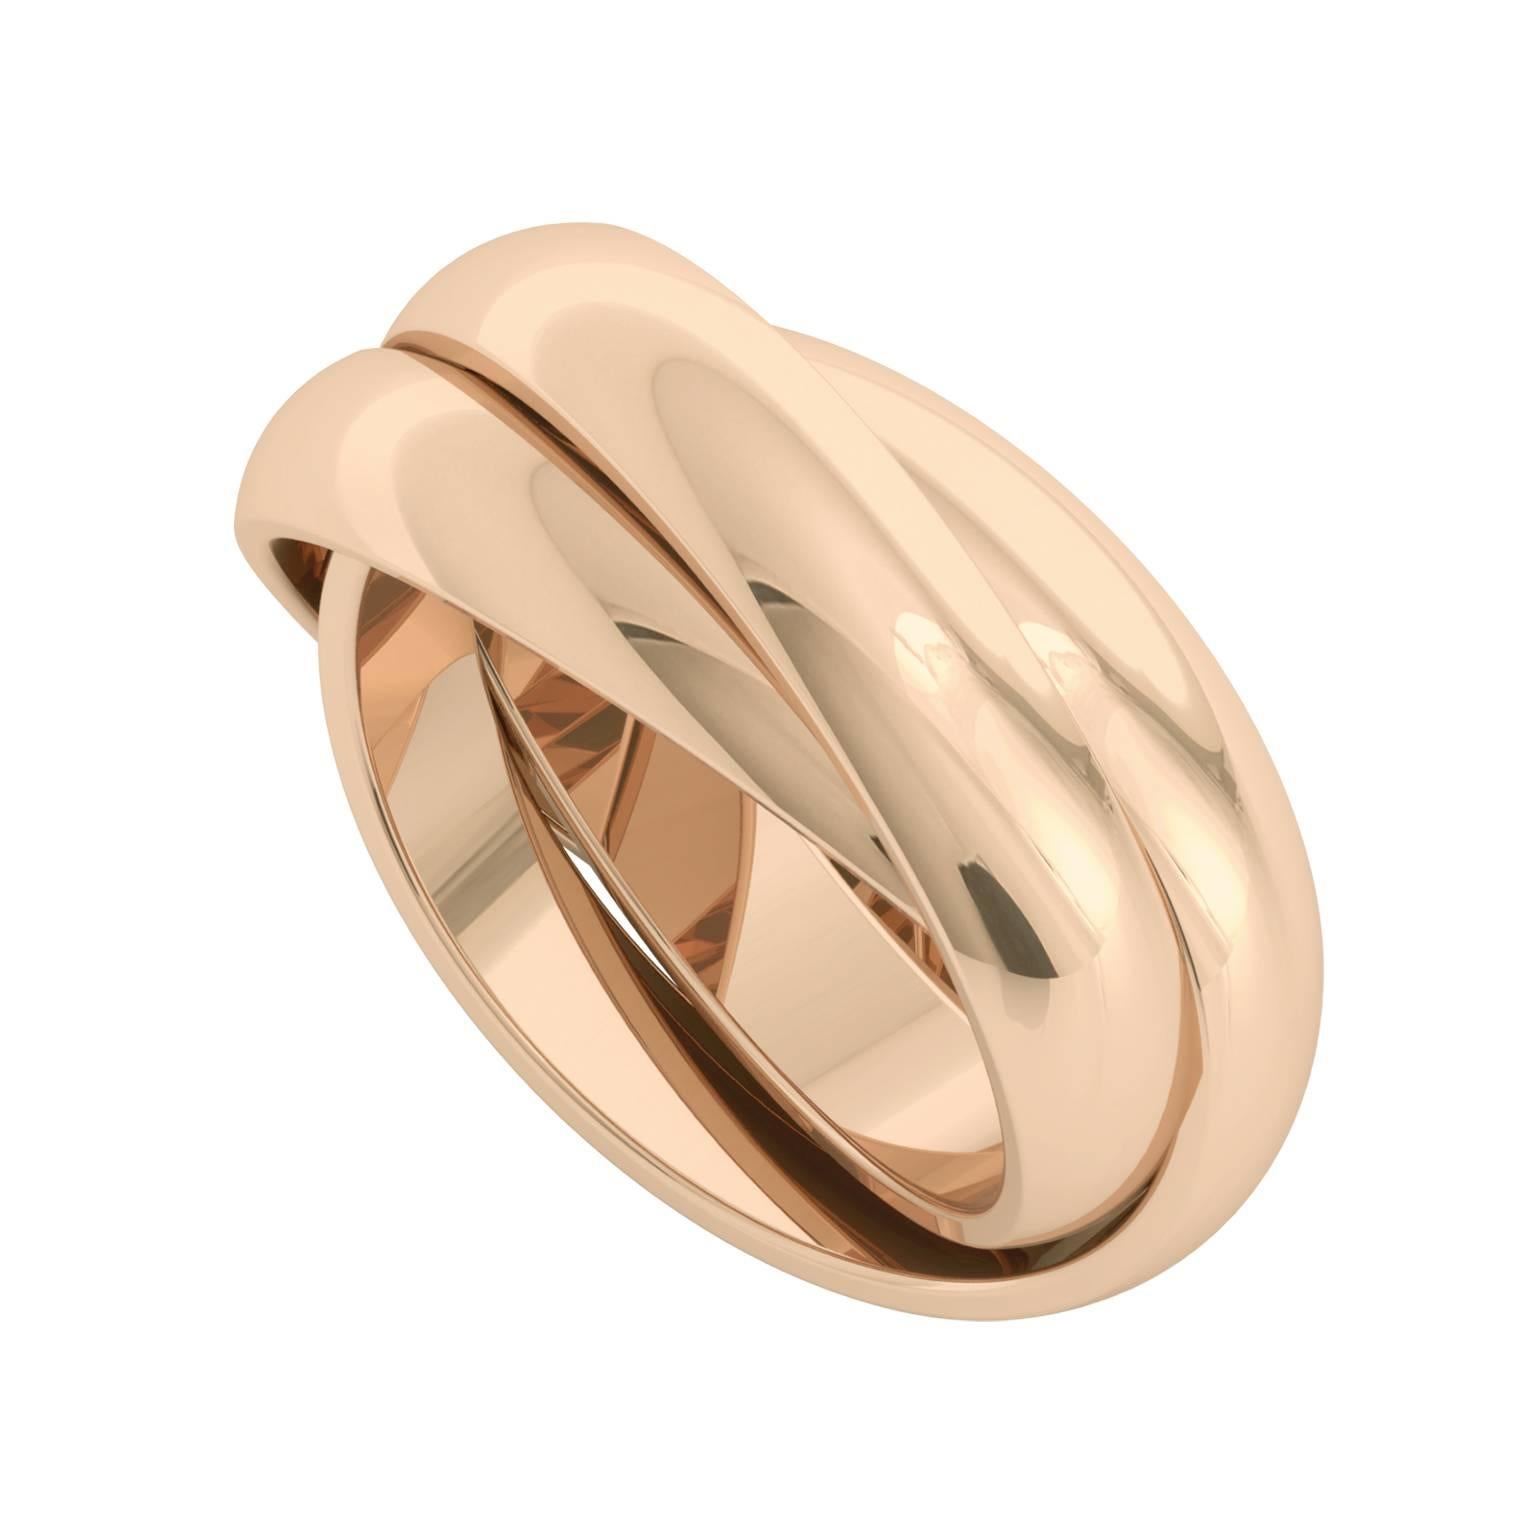 The 'Juno' is one of our best-selling russian wedding rings and its appearance in rose gold only enhances the romance of this symbolic ring. Representing strength, unity and a bond that cannot be broken, the Juno russian wedding ring makes a